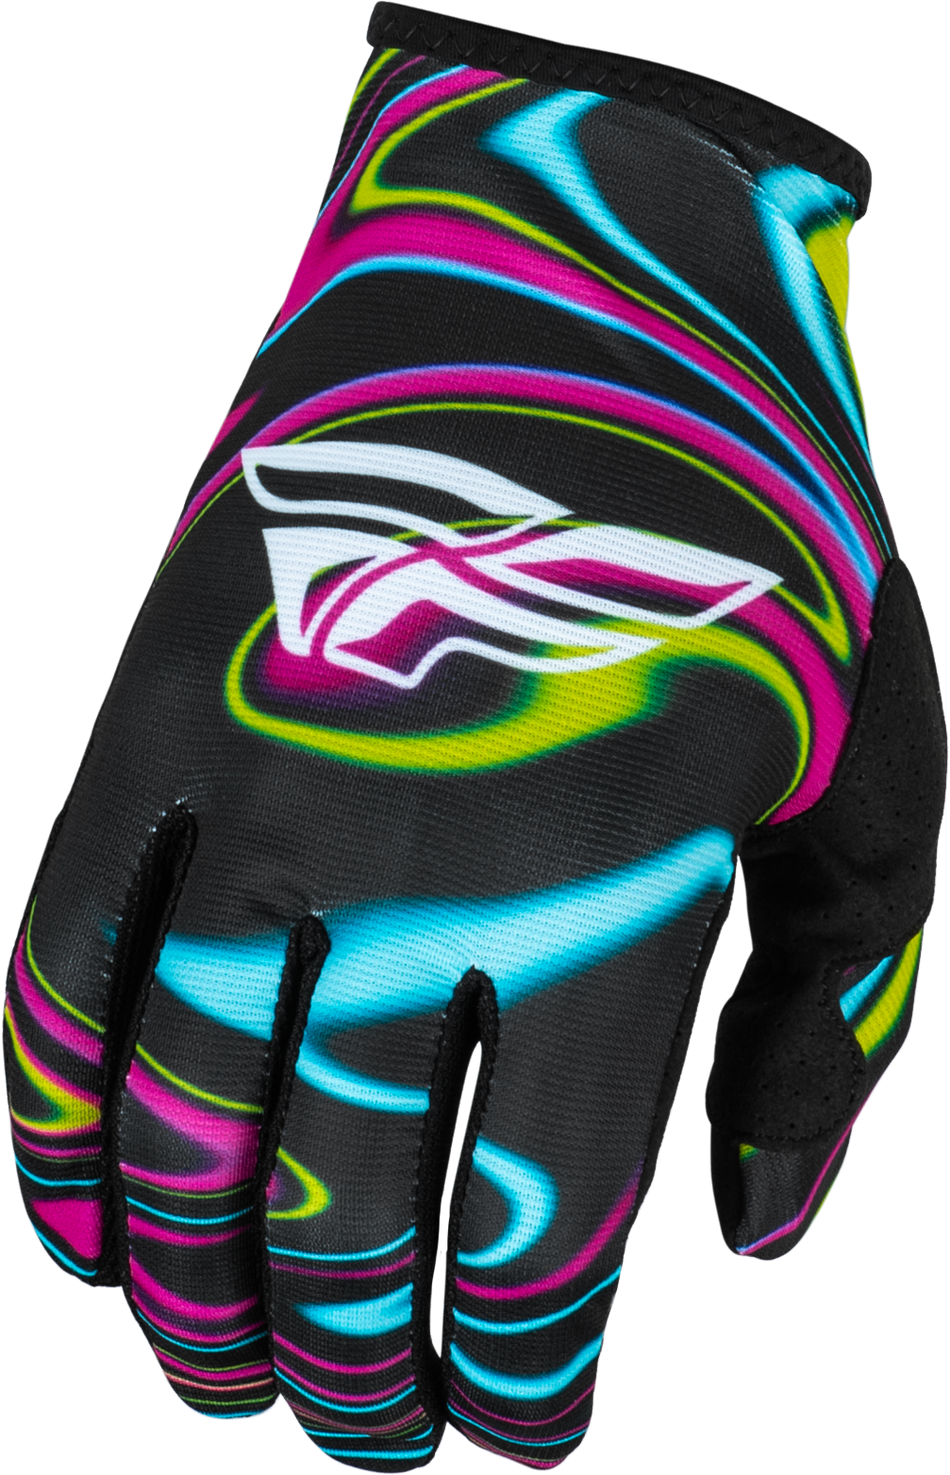 FLY RACING Youth Lite Warped Gloves Black/Pink/Electric Blue Ym 377-743YM